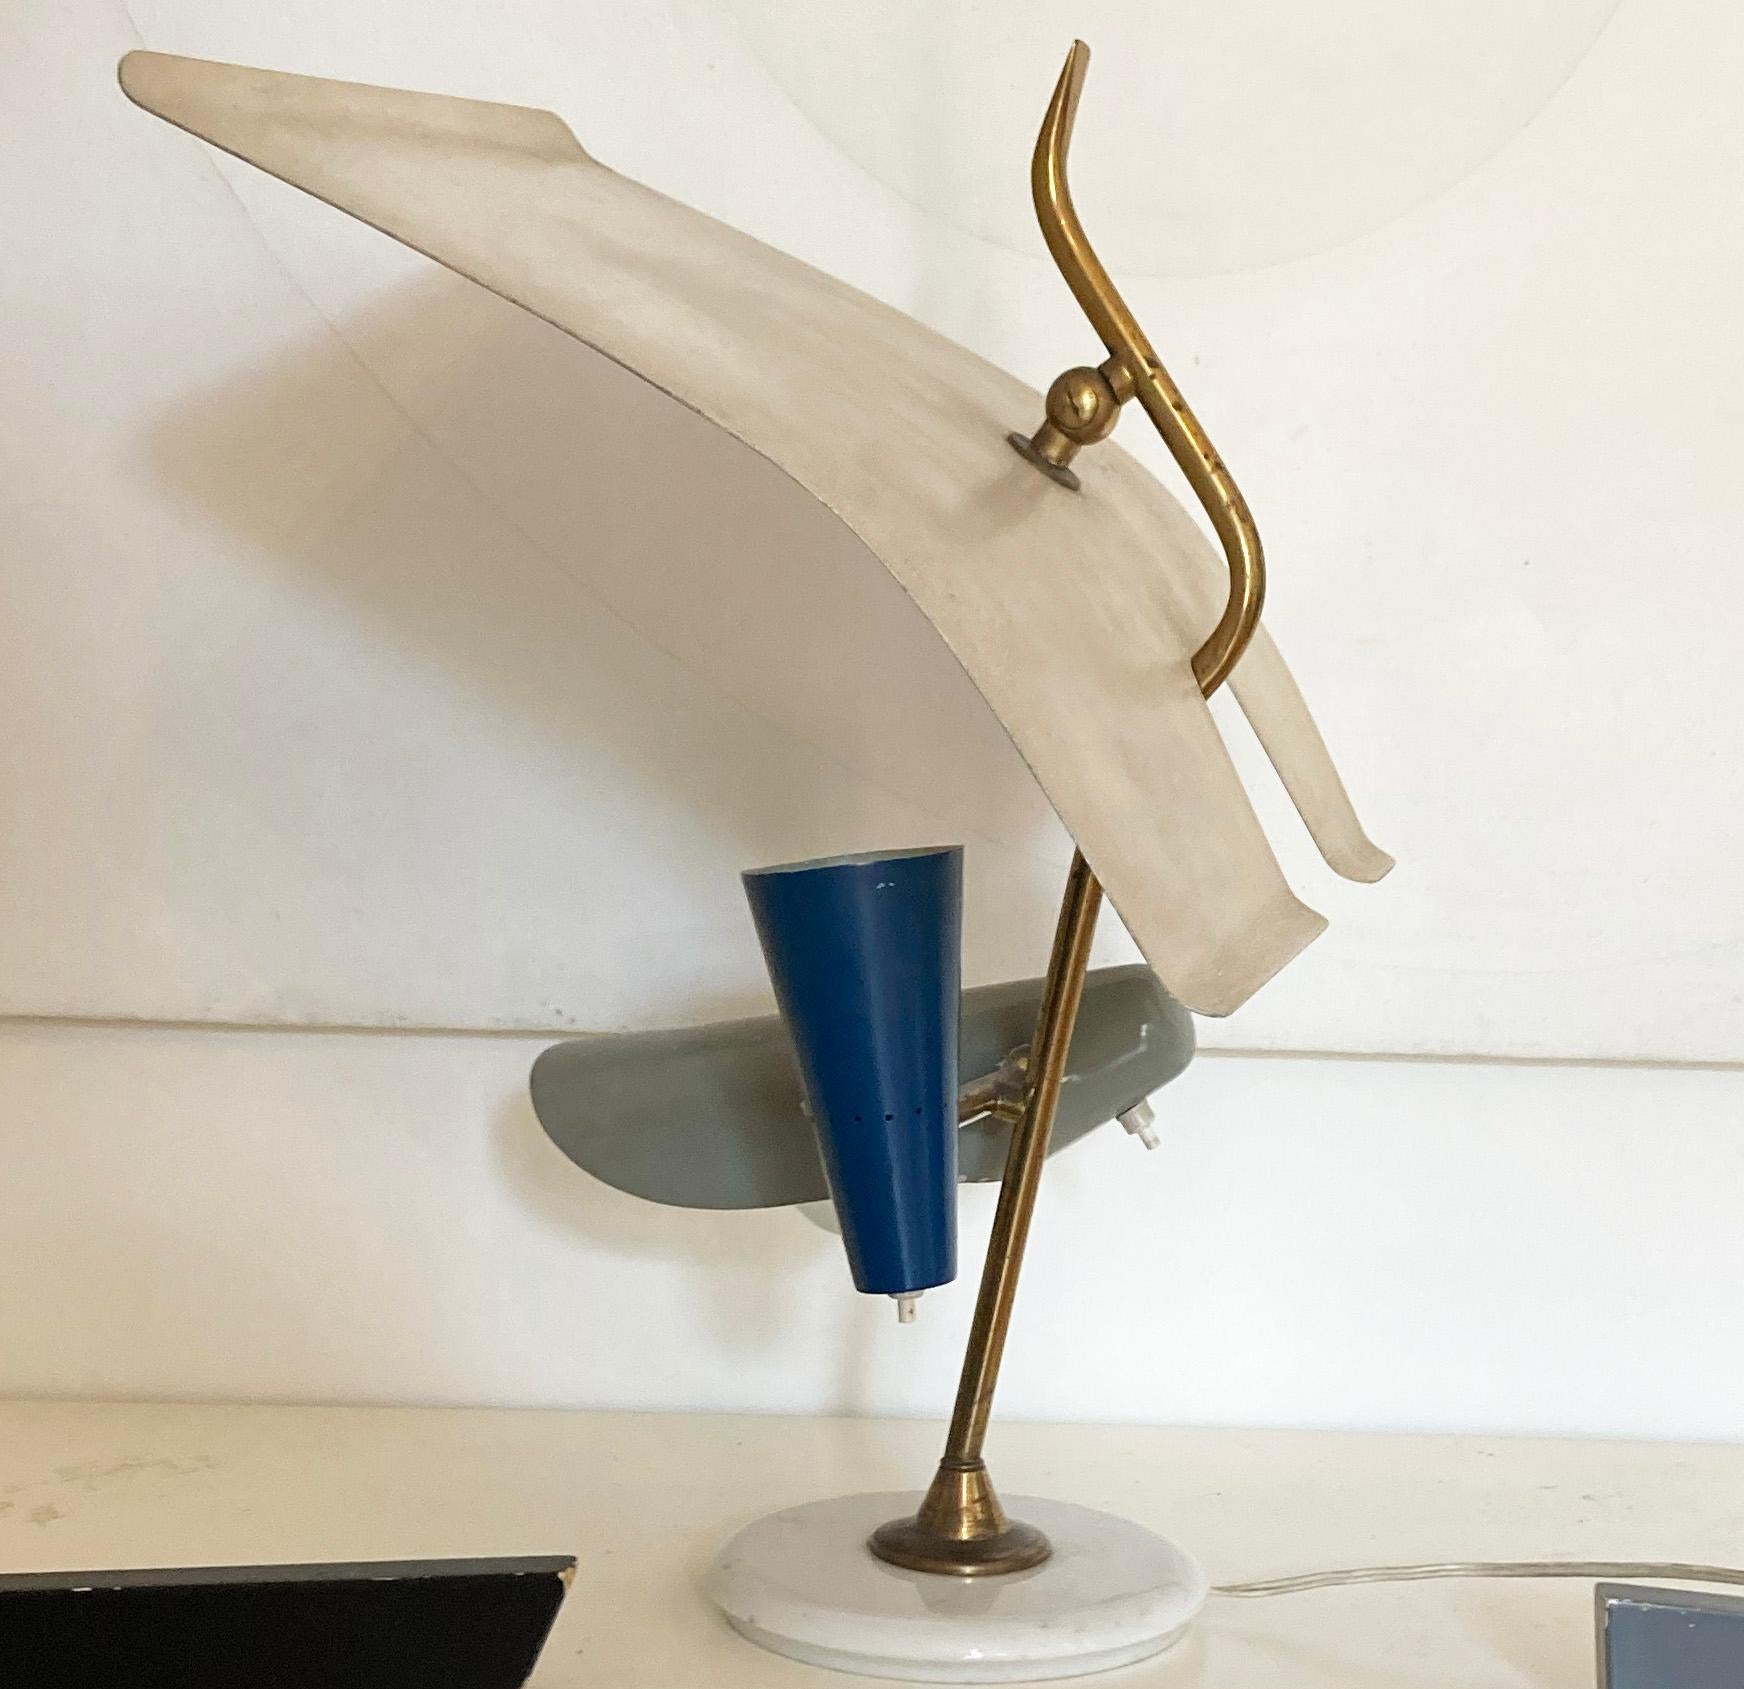 Rare table lamp manufatured by Lumem in 1950 .
Two adjustable reflectors can be adjust with white hat to direct the light 
Original patina 
Marble Base.
Original wire and switch.